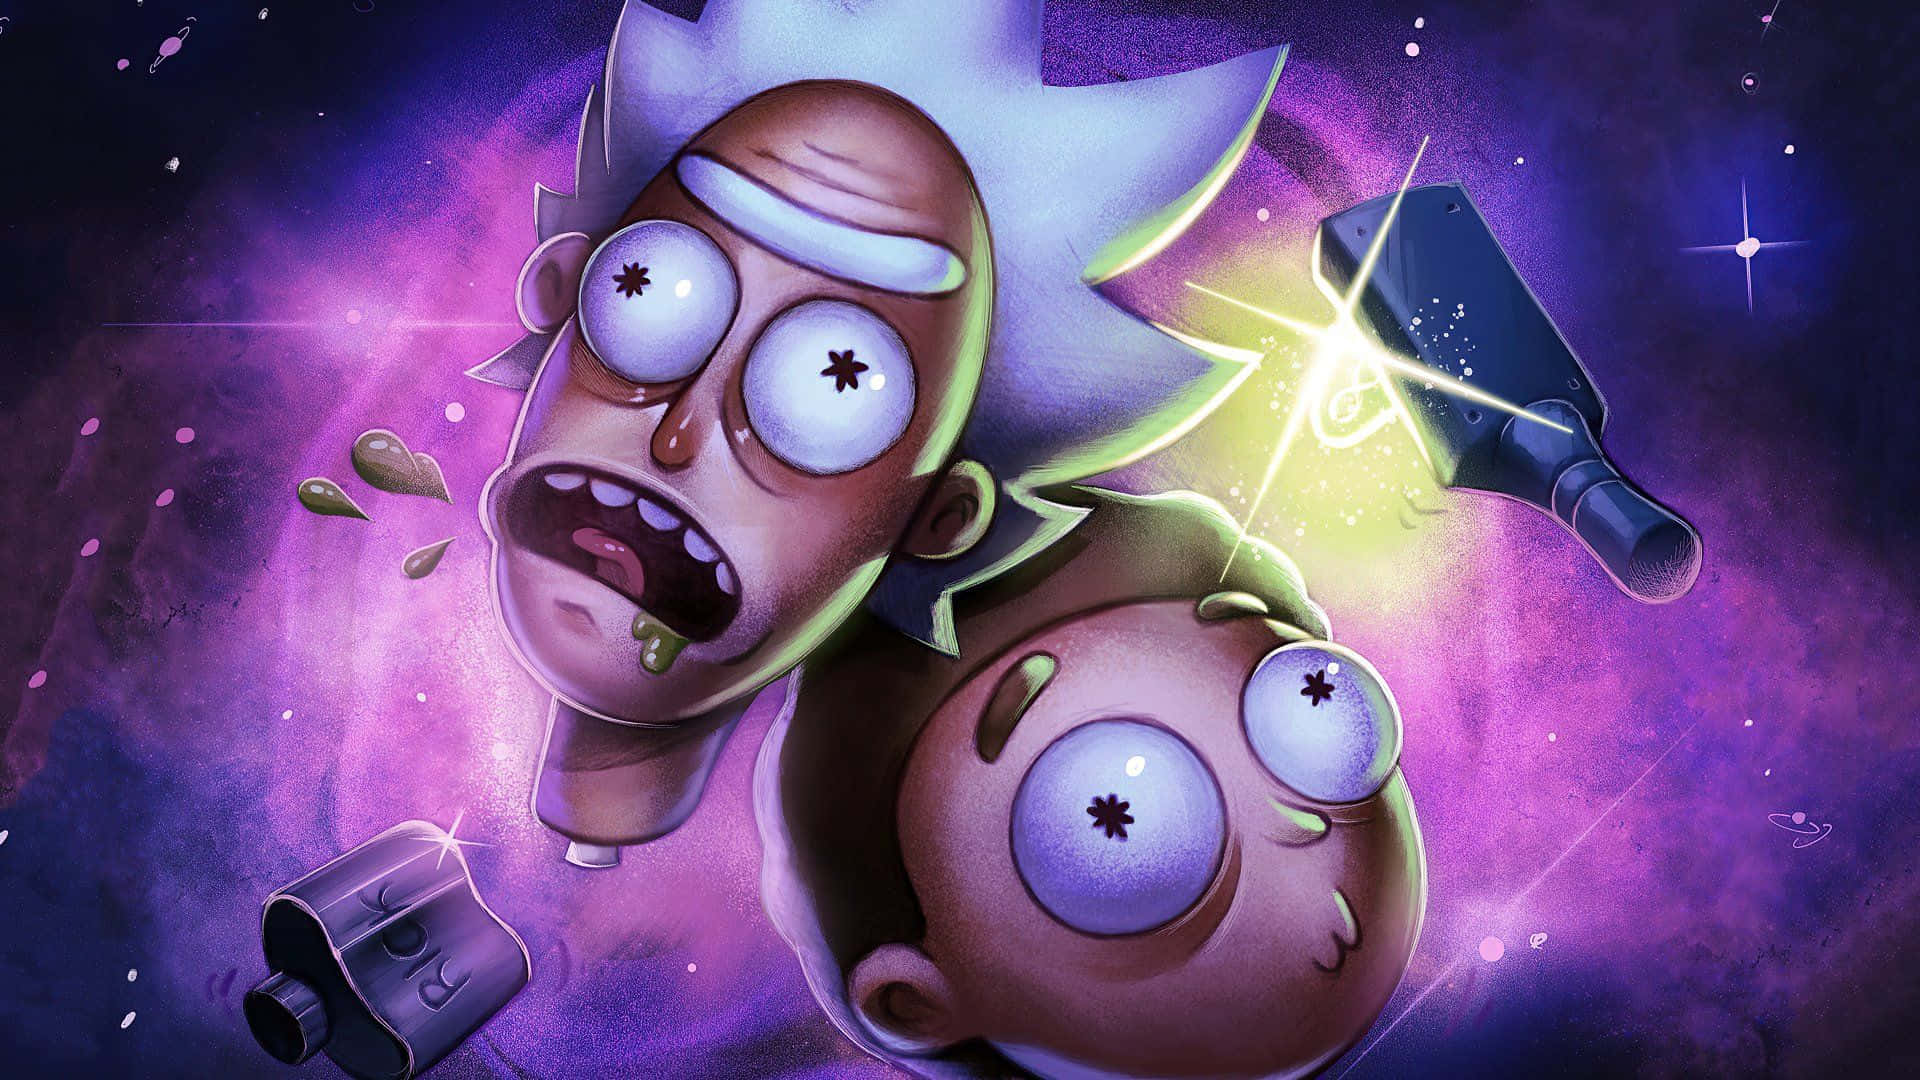 The inter-galactic adventures of Rick and Morty